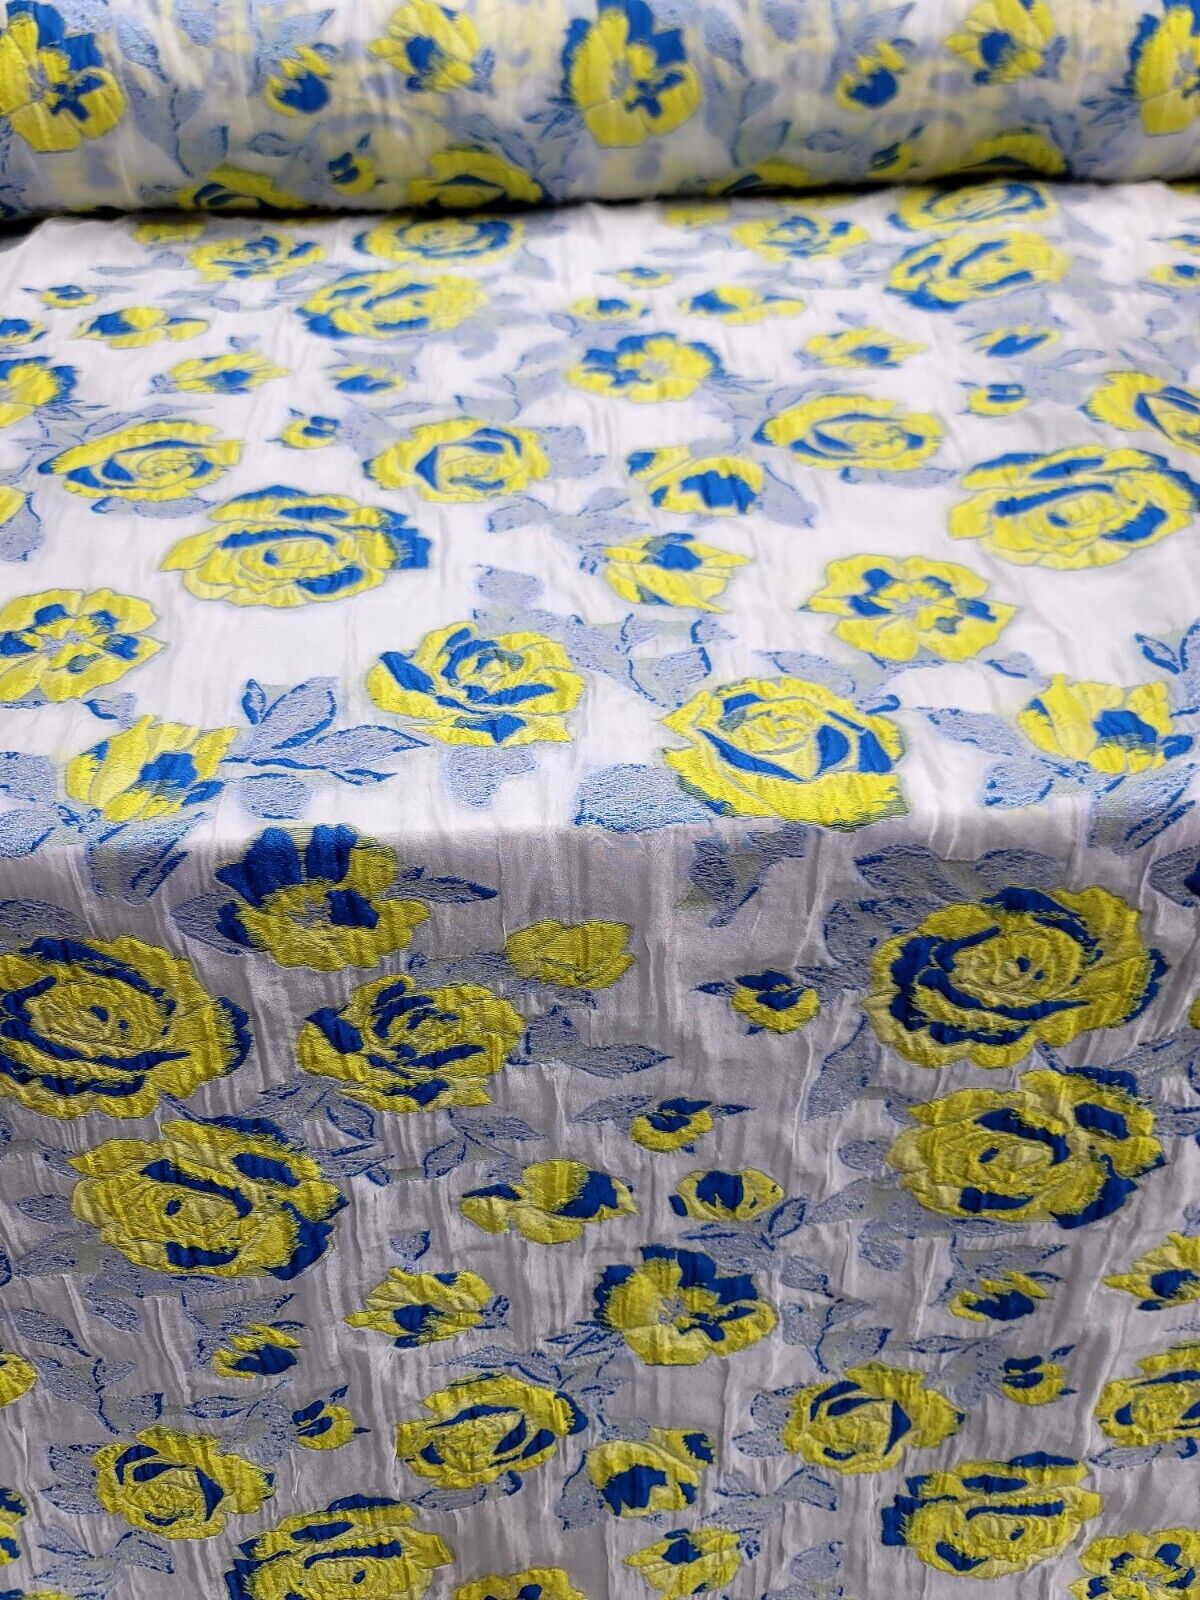 Yellow and Royal Blue Floral Organza Brocade Jacquard Fabric - Sold by Yard - Perfect for Fashion, Dressmaking, and New Creations